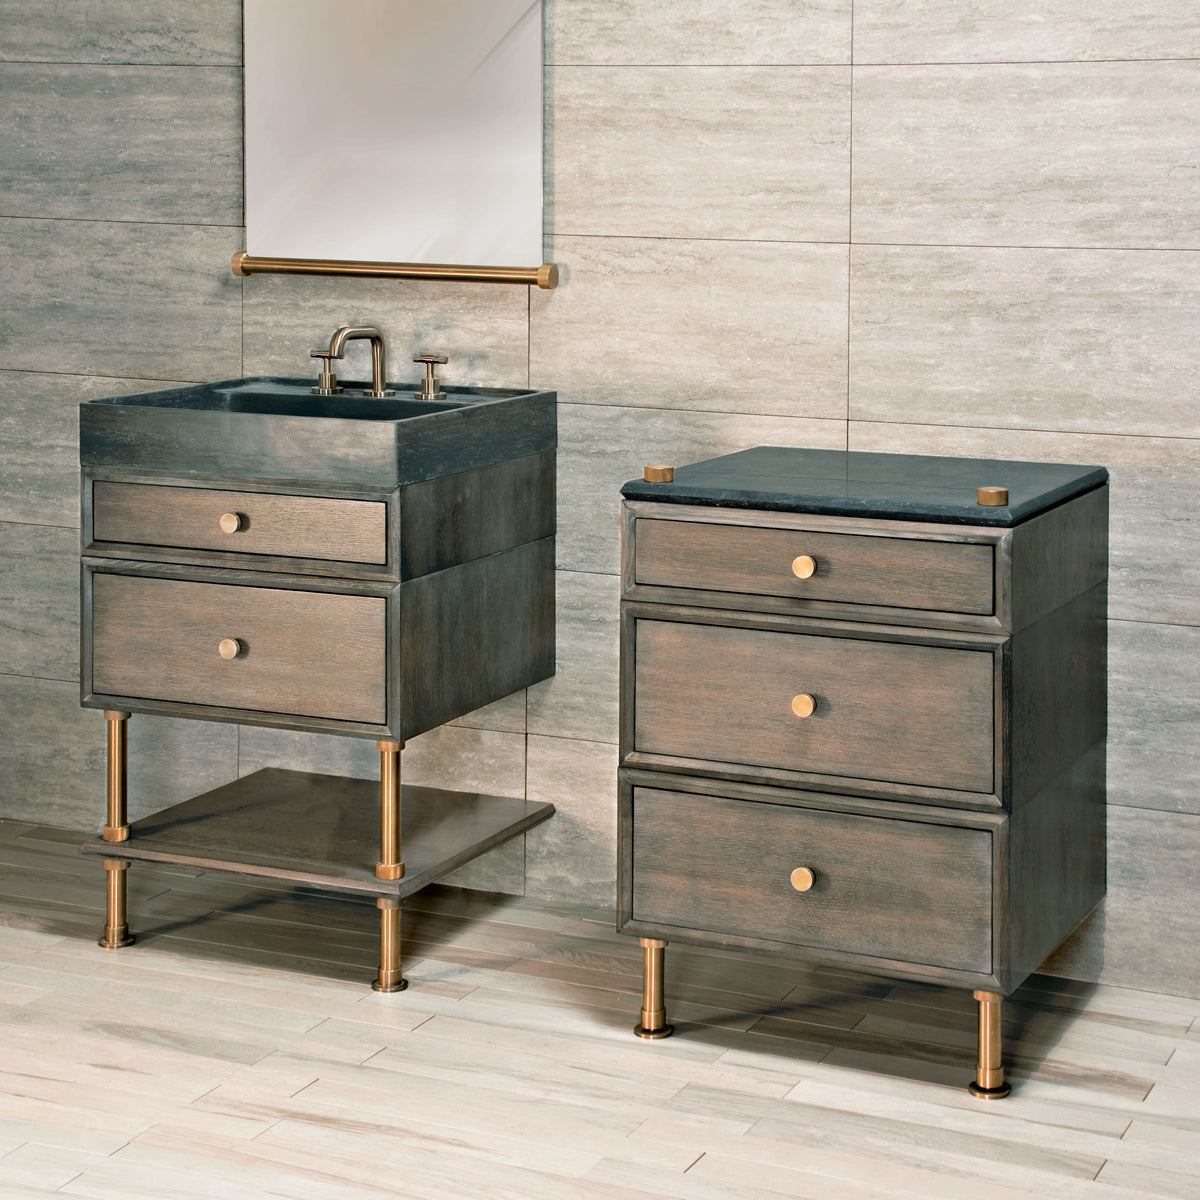 Ventus Bath Sink with Faucet Deck paired with Elemental Classic Vanity with Split Drawers image 1 of 2